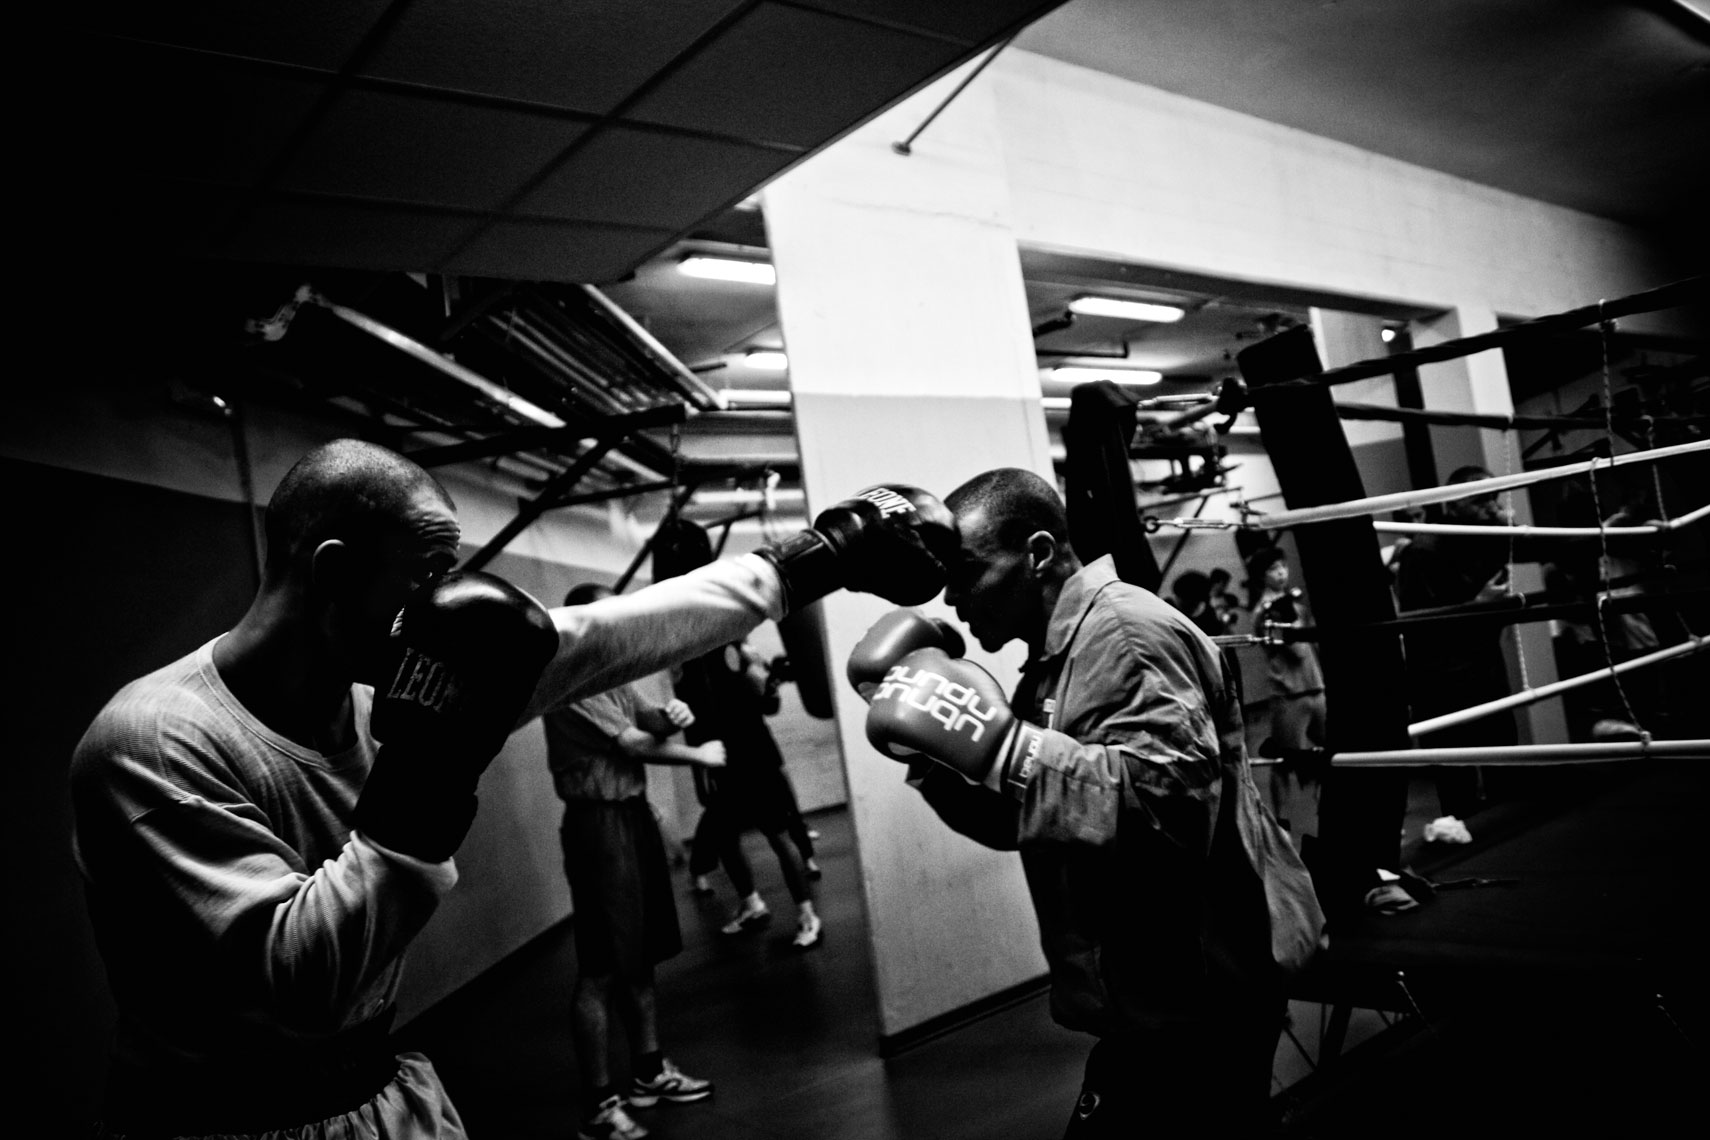 ITALY. Florence, 27th October 2011. Leonard Bundu trying some sequences of movements with a sparring partner in preparation of the match for the EBU (European Boxing Union) Welter Weight crown.